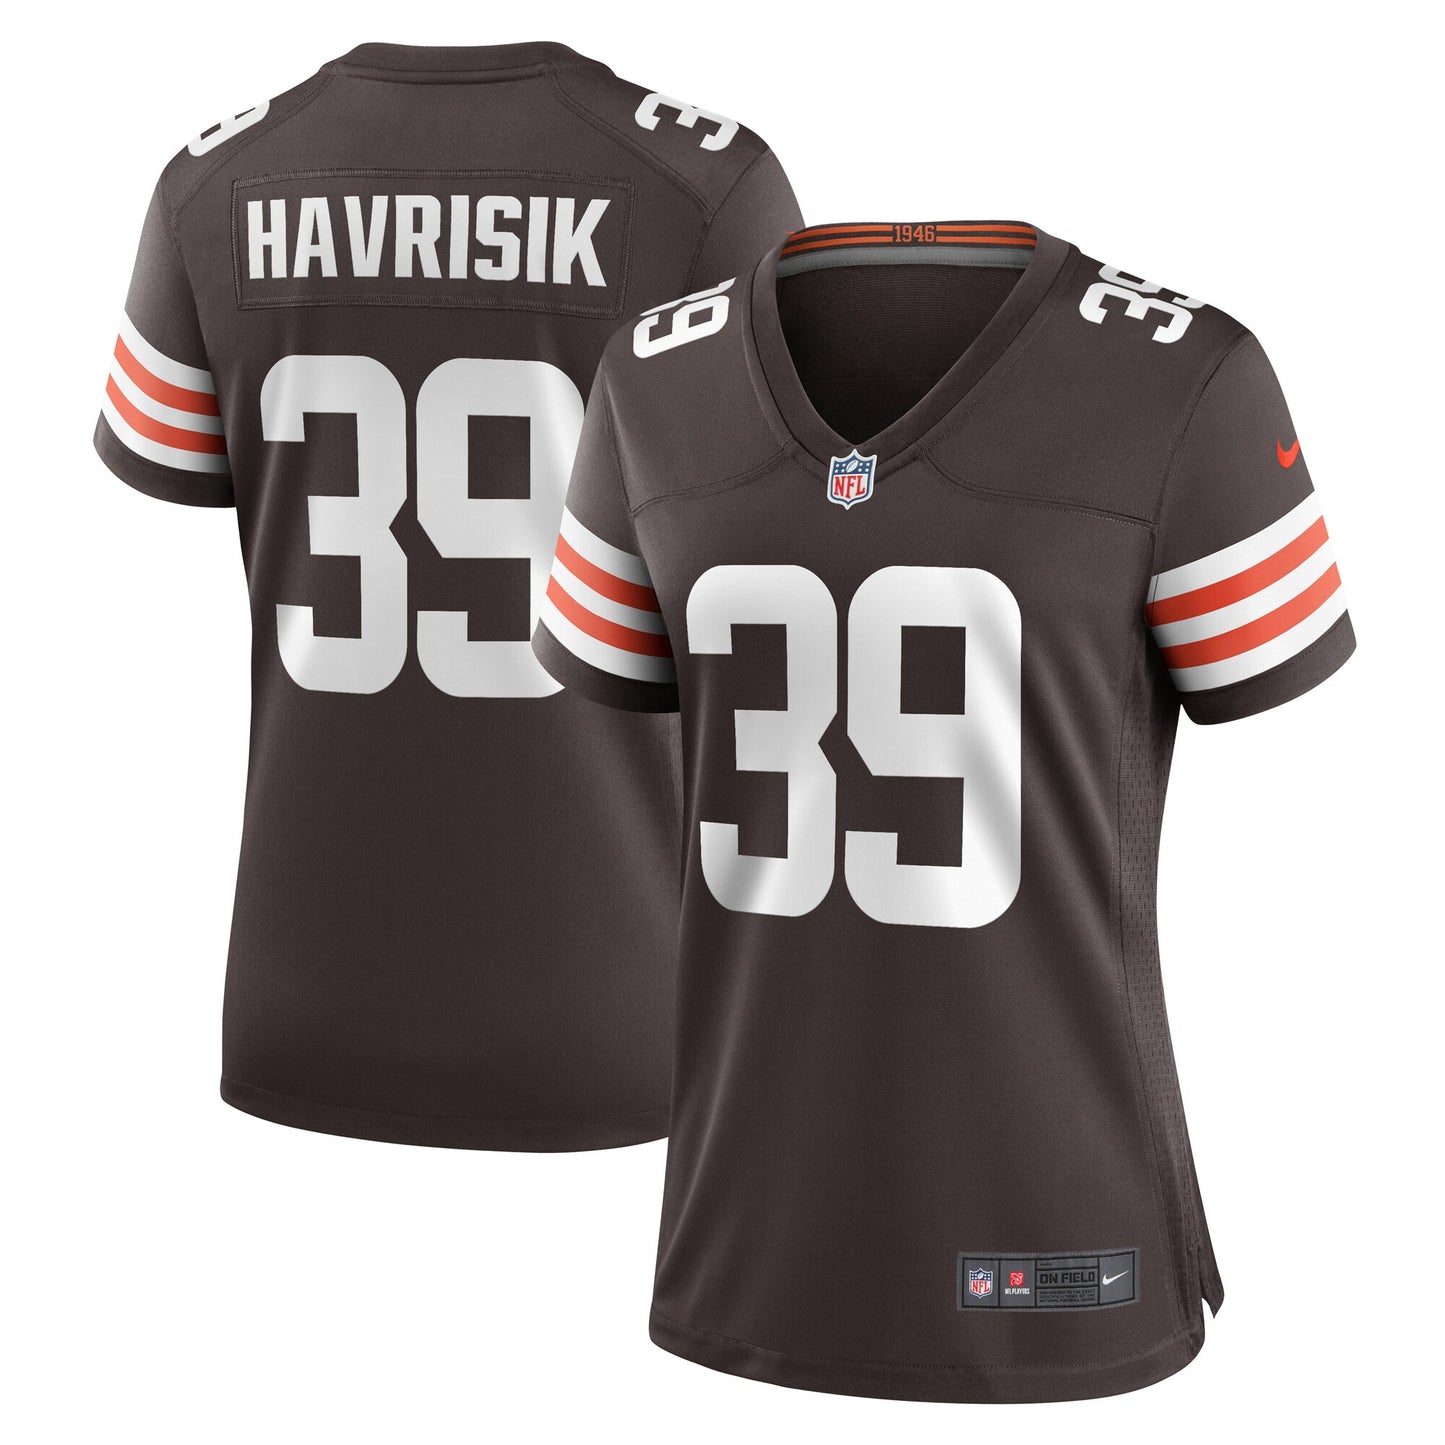 Lucas Havrisik Cleveland Browns Nike Women's Team Game Jersey - Brown